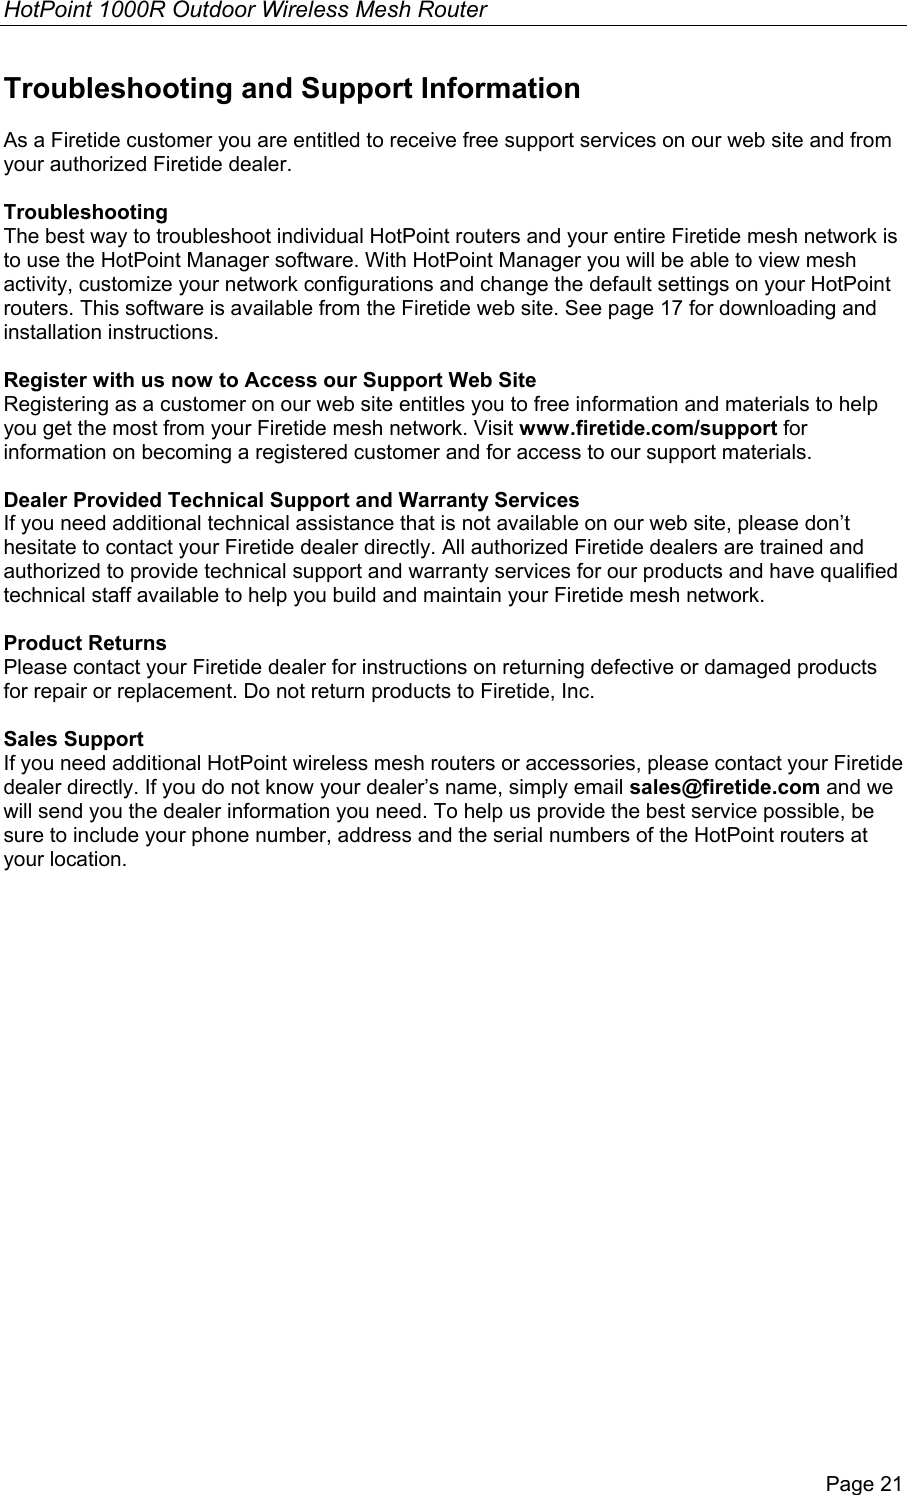 HotPoint 1000R Outdoor Wireless Mesh Router Page 21 Troubleshooting and Support Information  As a Firetide customer you are entitled to receive free support services on our web site and from your authorized Firetide dealer.  Troubleshooting The best way to troubleshoot individual HotPoint routers and your entire Firetide mesh network is to use the HotPoint Manager software. With HotPoint Manager you will be able to view mesh activity, customize your network configurations and change the default settings on your HotPoint routers. This software is available from the Firetide web site. See page 17 for downloading and installation instructions.  Register with us now to Access our Support Web Site Registering as a customer on our web site entitles you to free information and materials to help you get the most from your Firetide mesh network. Visit www.firetide.com/support for information on becoming a registered customer and for access to our support materials.  Dealer Provided Technical Support and Warranty Services If you need additional technical assistance that is not available on our web site, please don’t hesitate to contact your Firetide dealer directly. All authorized Firetide dealers are trained and authorized to provide technical support and warranty services for our products and have qualified technical staff available to help you build and maintain your Firetide mesh network.  Product Returns Please contact your Firetide dealer for instructions on returning defective or damaged products for repair or replacement. Do not return products to Firetide, Inc.  Sales Support If you need additional HotPoint wireless mesh routers or accessories, please contact your Firetide dealer directly. If you do not know your dealer’s name, simply email sales@firetide.com and we will send you the dealer information you need. To help us provide the best service possible, be sure to include your phone number, address and the serial numbers of the HotPoint routers at your location.   